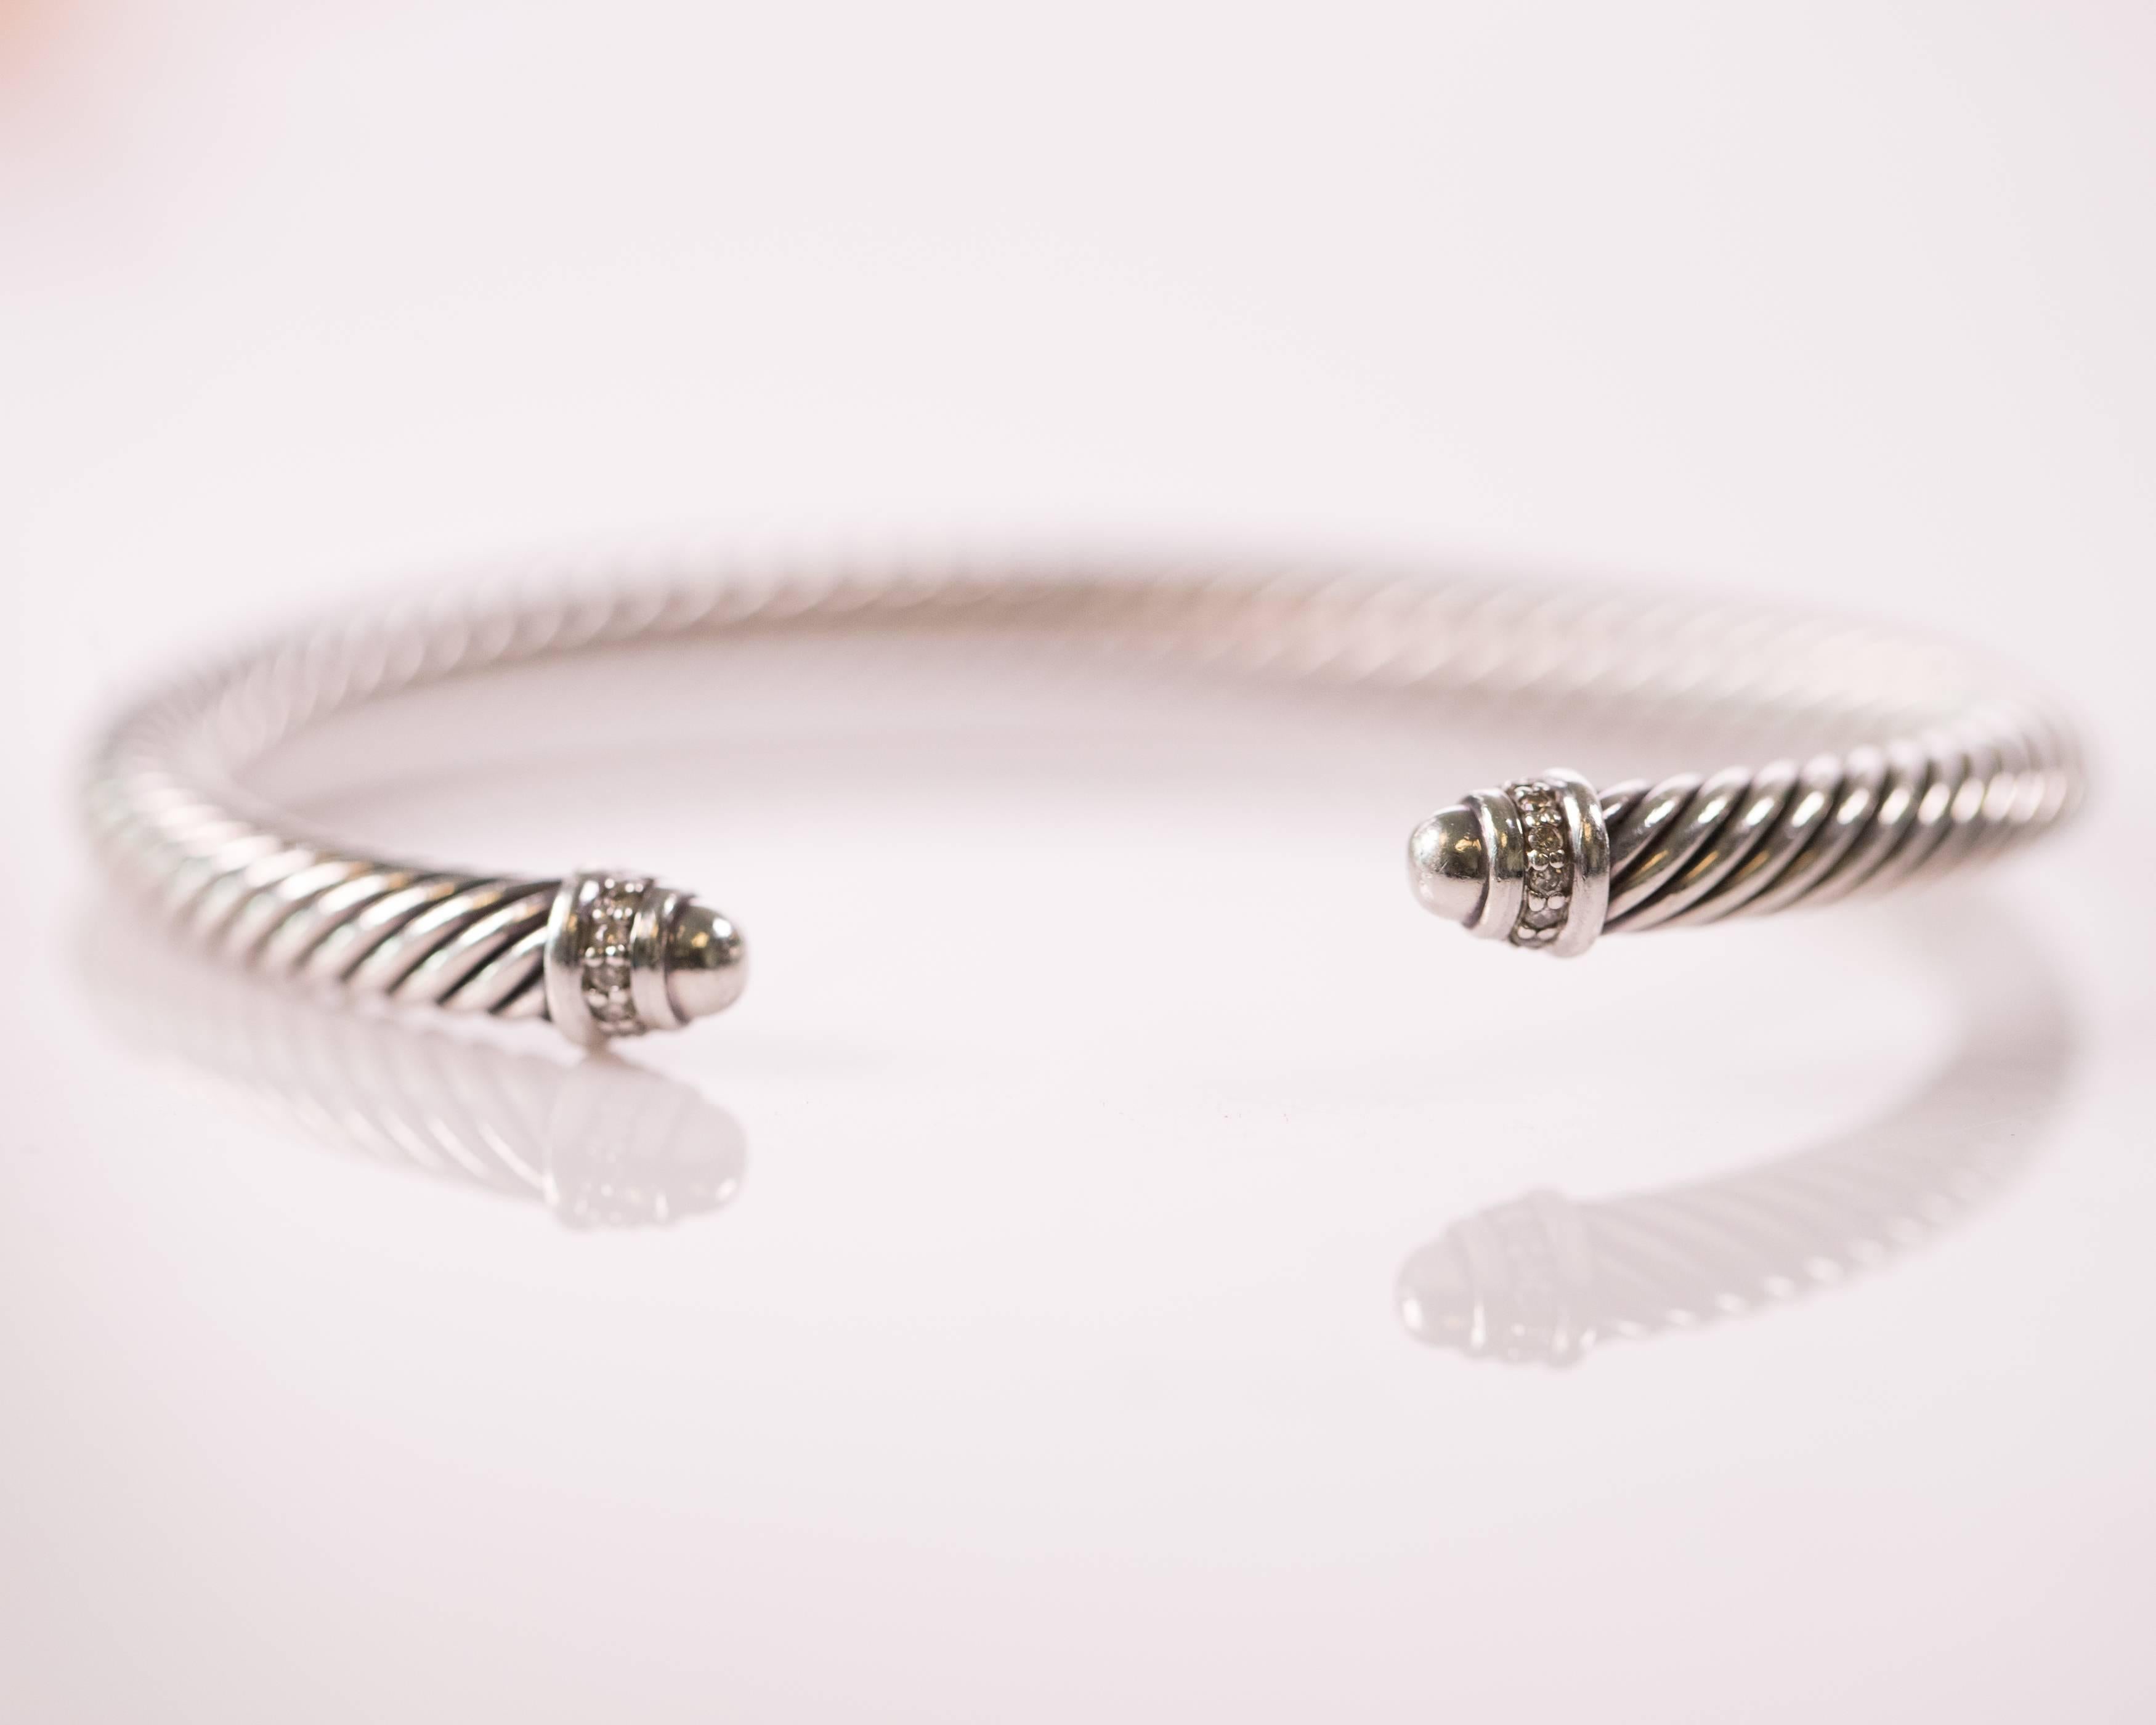 Wear this David Yurman Cable Classics Bracelet with Diamonds every day! The twisted cable bracelet is made from Sterling Silver and measures 5 millimeters thick. On each end of the cable is a sterling silver cap featuring a band of pave diamonds and